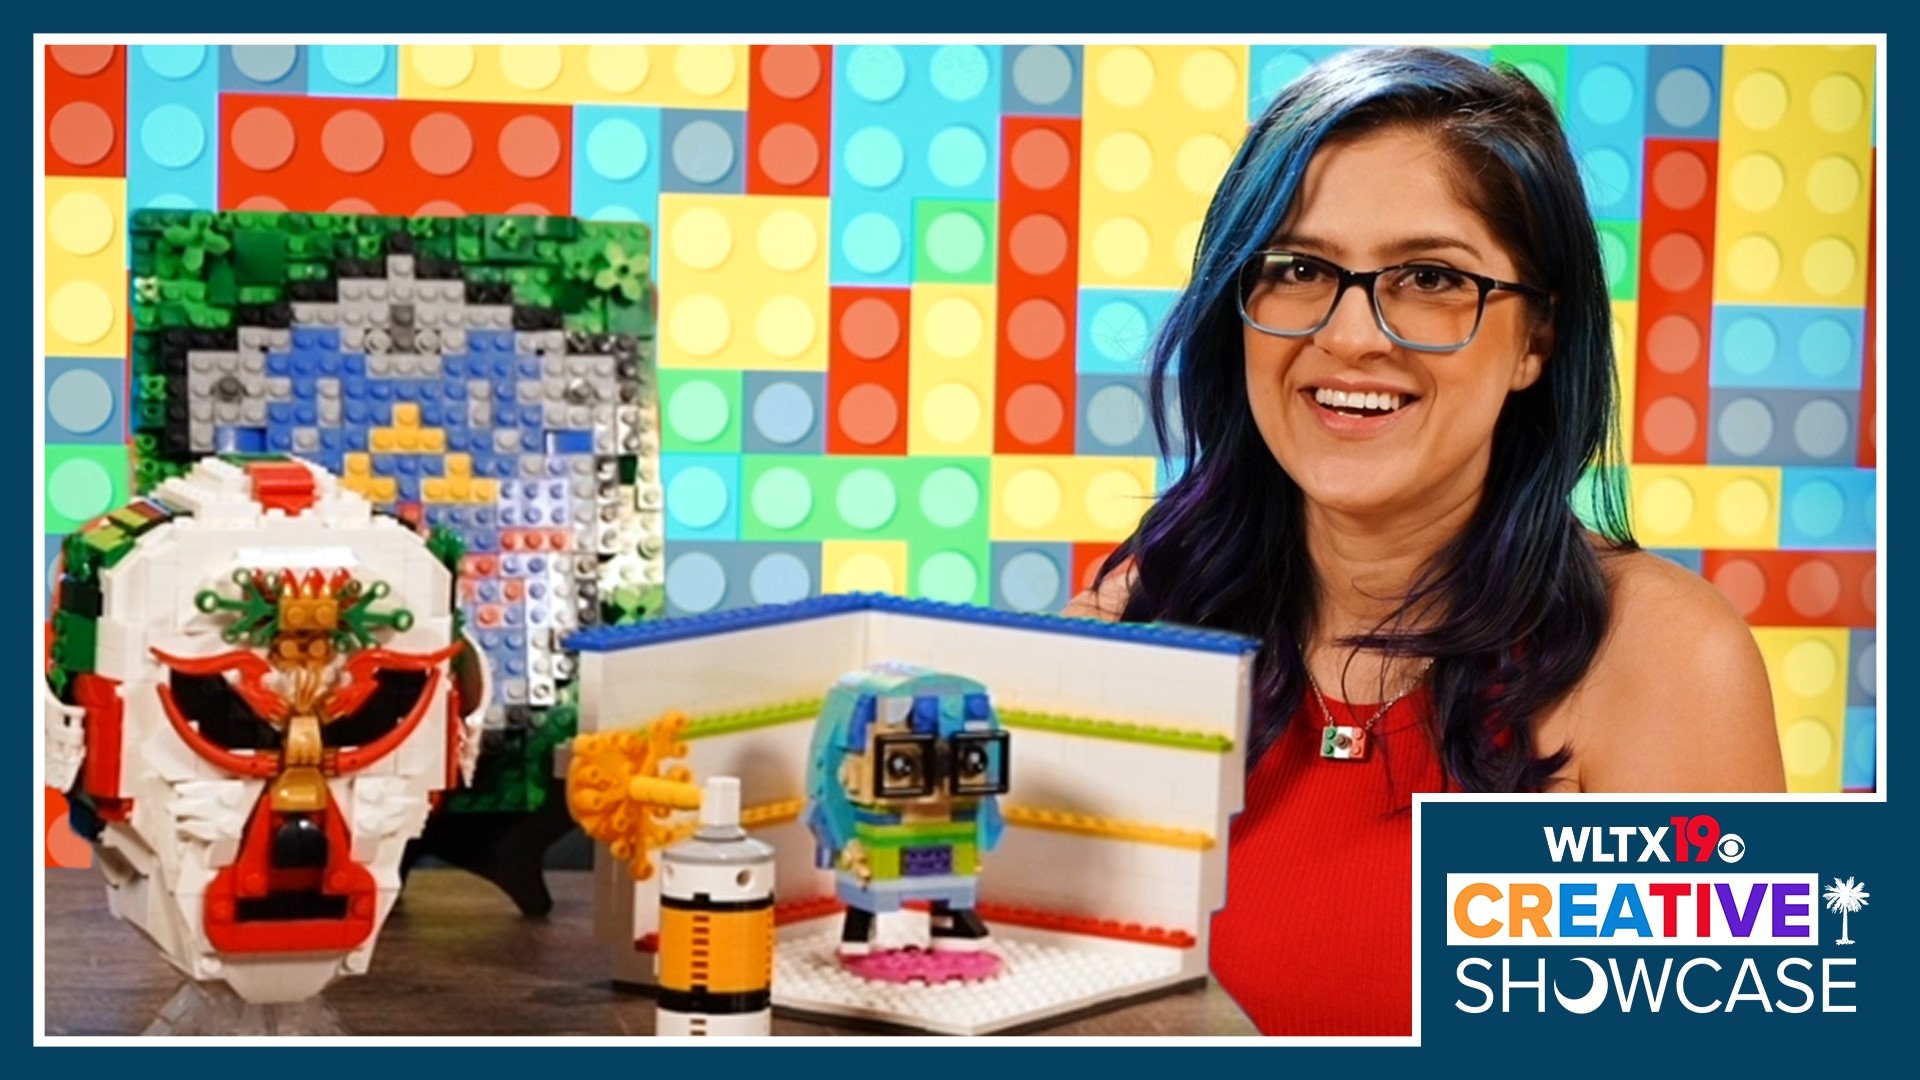 Building with bricks is more than playtime. Learn how Adult Fans of LEGO (AFOLs) turn building with bricks into a community.